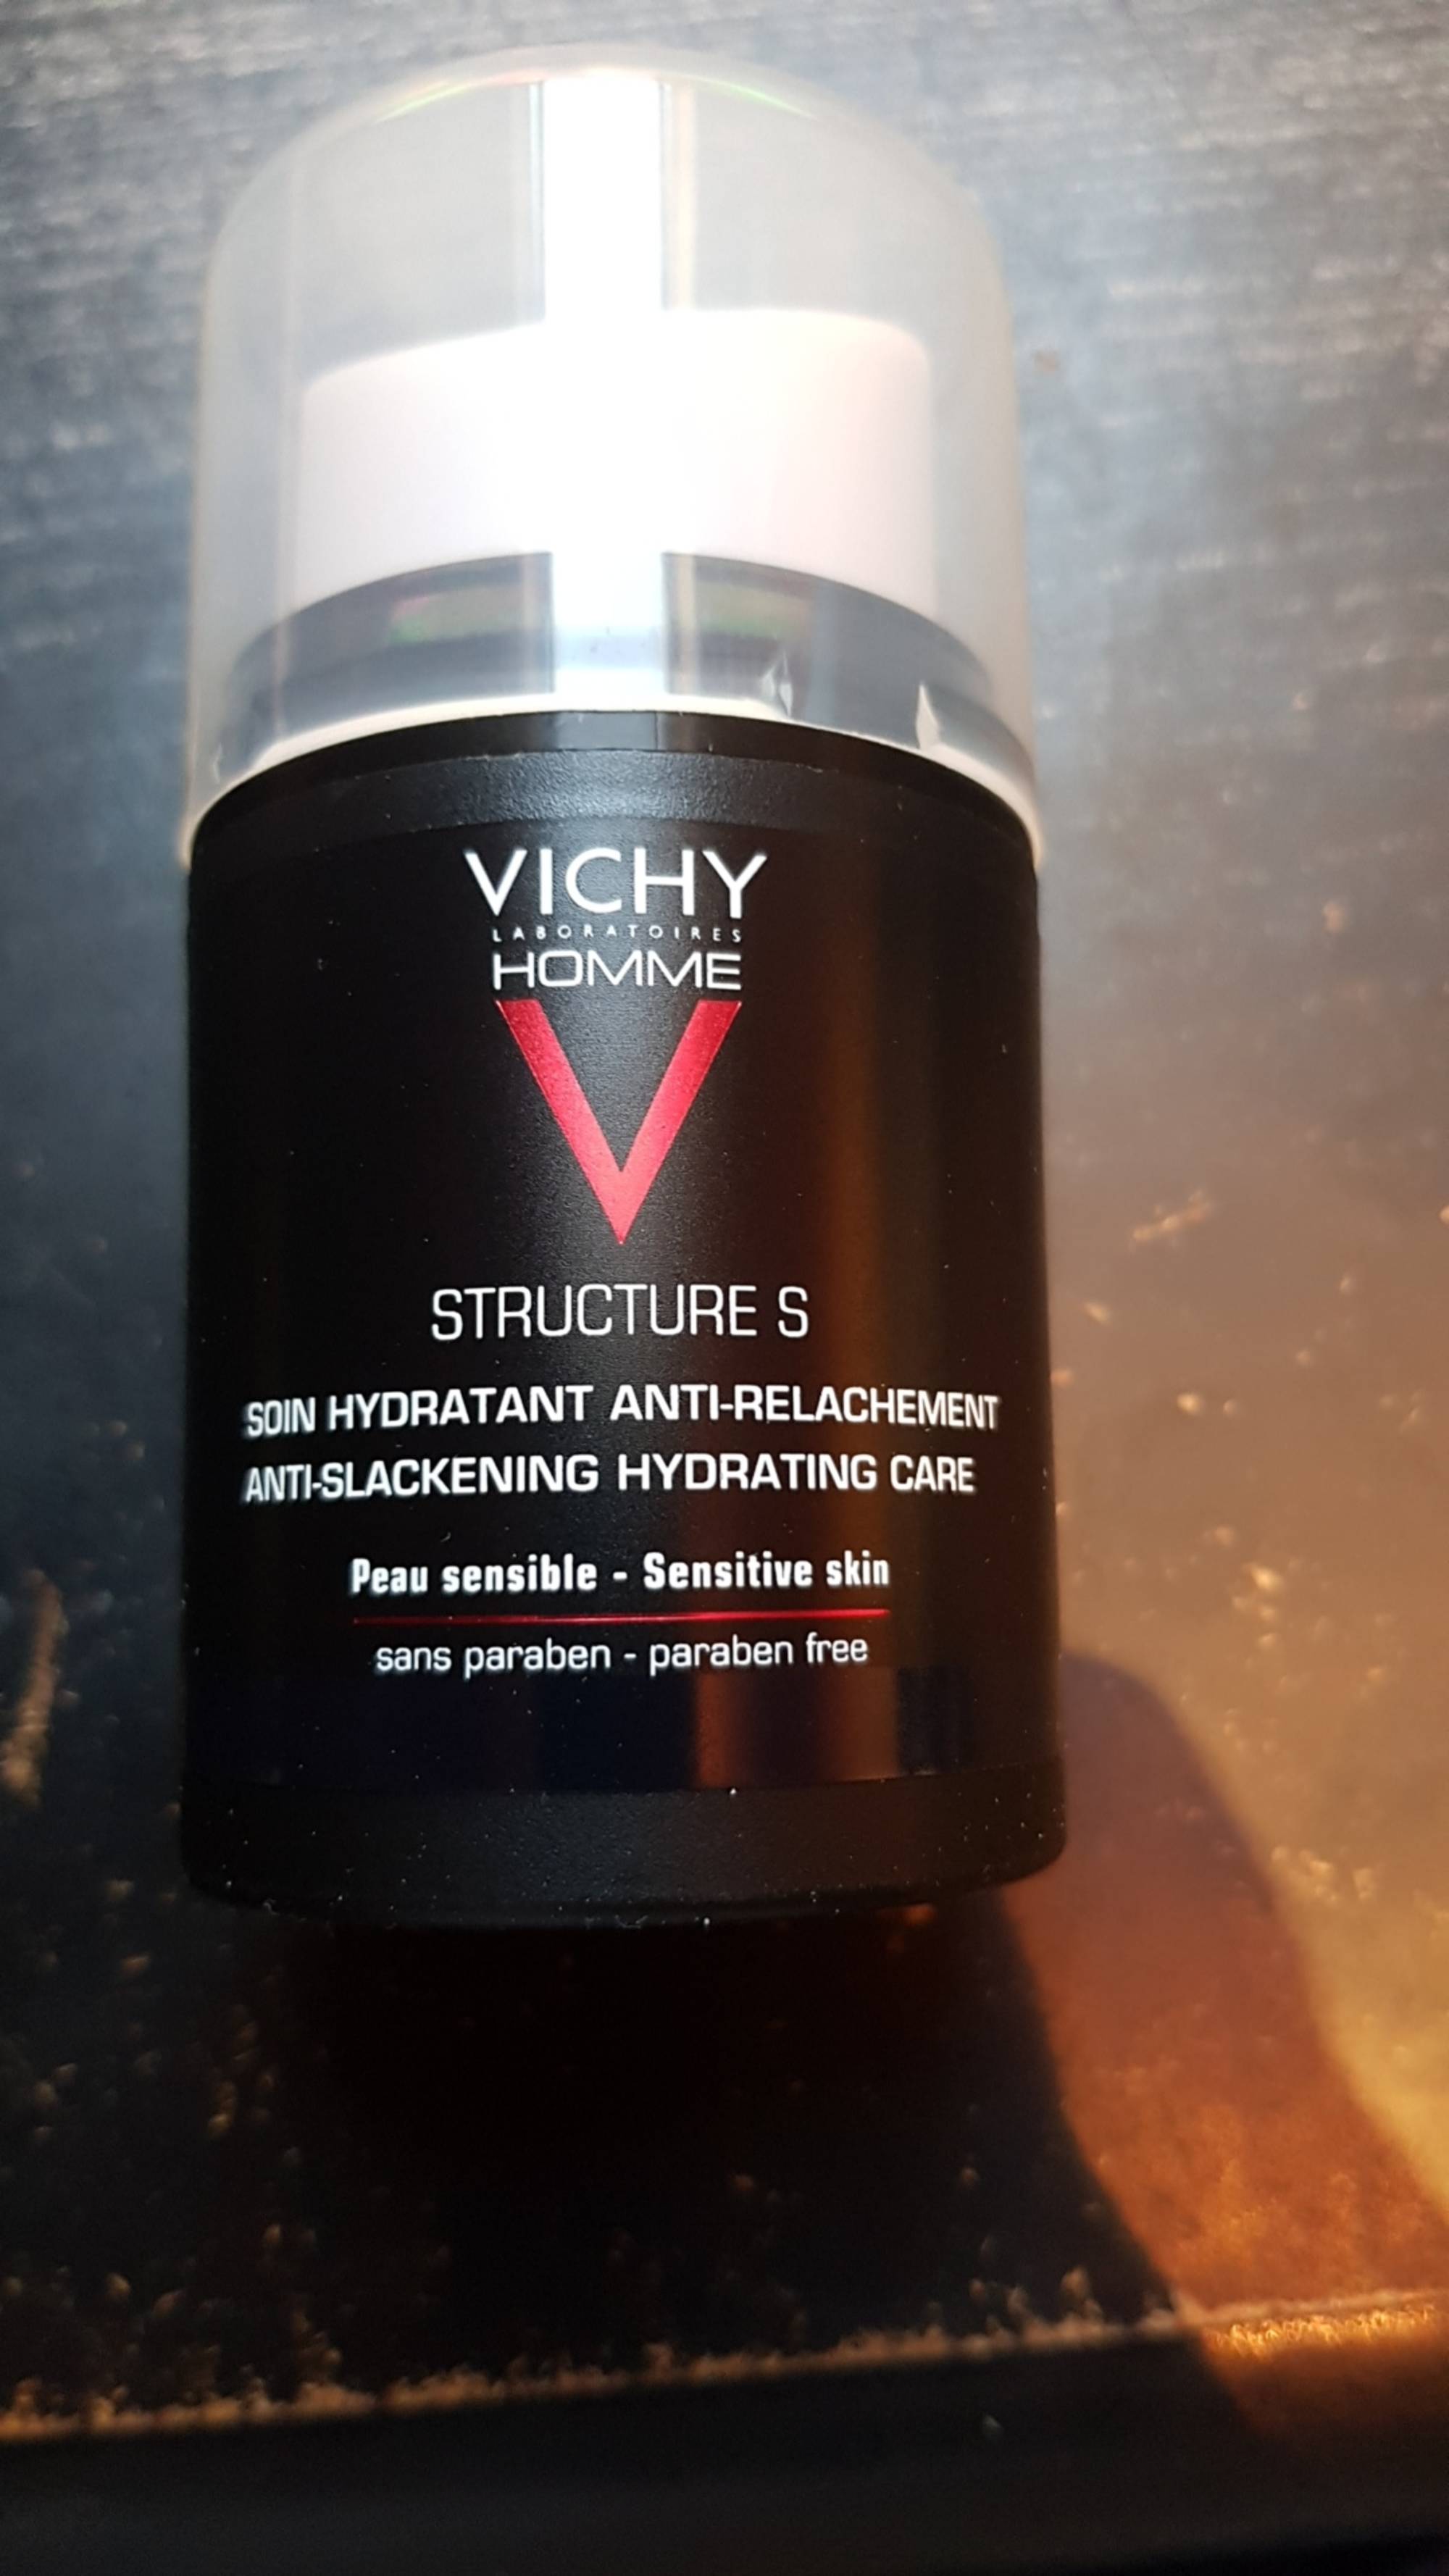 VICHY HOMME - Structure S - Soin hydratant anti-relâchement